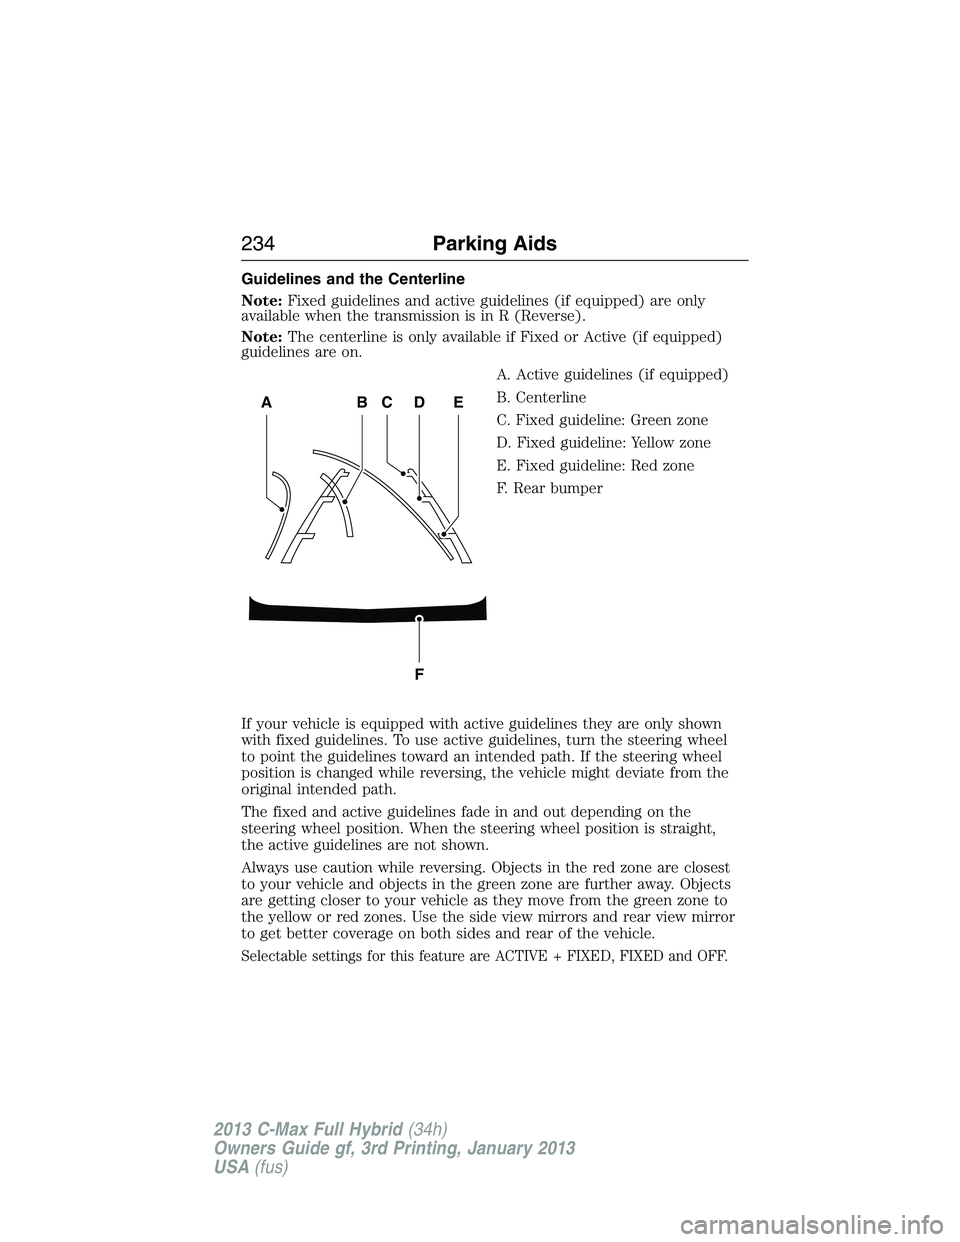 FORD C MAX 2013  Owners Manual Guidelines and the Centerline
Note:Fixed guidelines and active guidelines (if equipped) are only
available when the transmission is in R (Reverse).
Note:The centerline is only available if Fixed or Ac